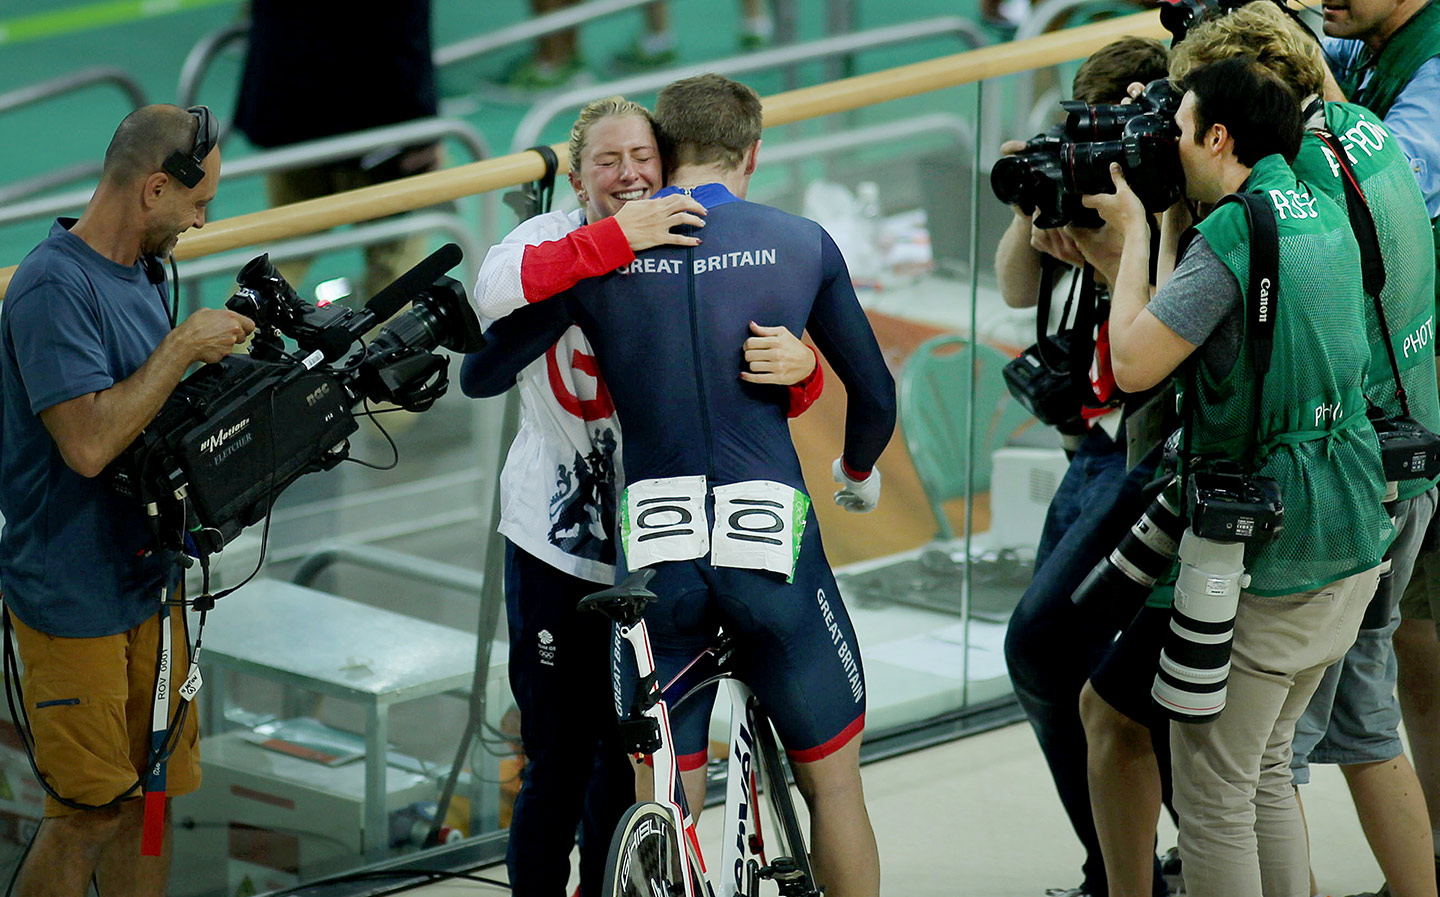 Laura Trott, Kenny's then-fiancee, hugs him after his gold medal ride in the Men's Keirin during the track cycling competition at the Rio Olympic Games, 2016.